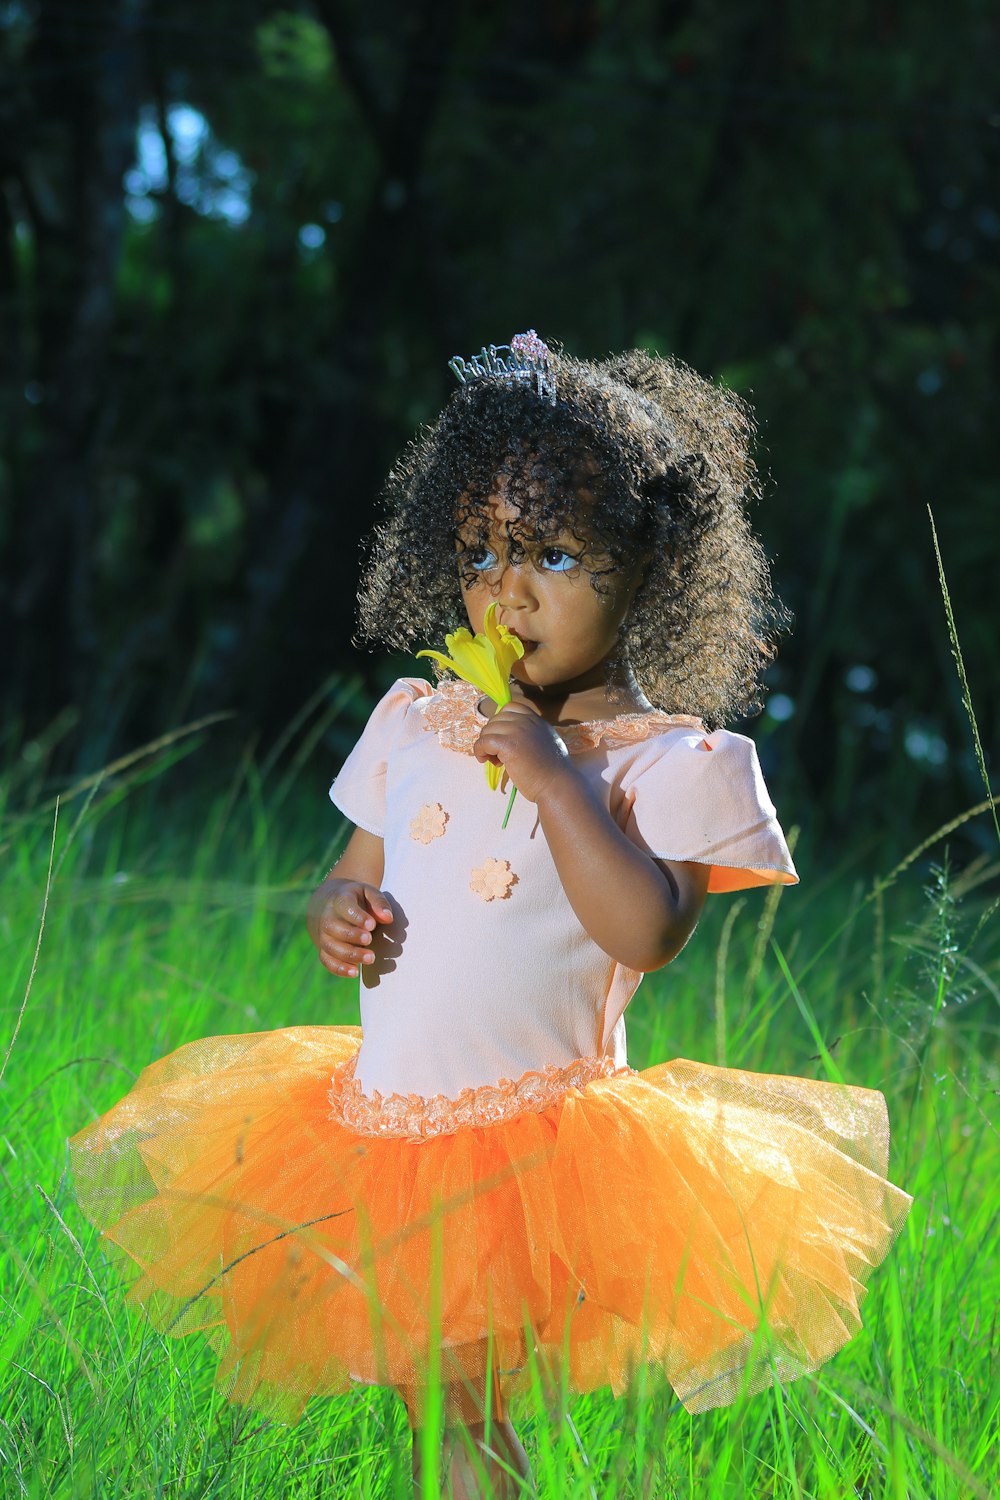 a little girl standing in a grassy field holding a flower